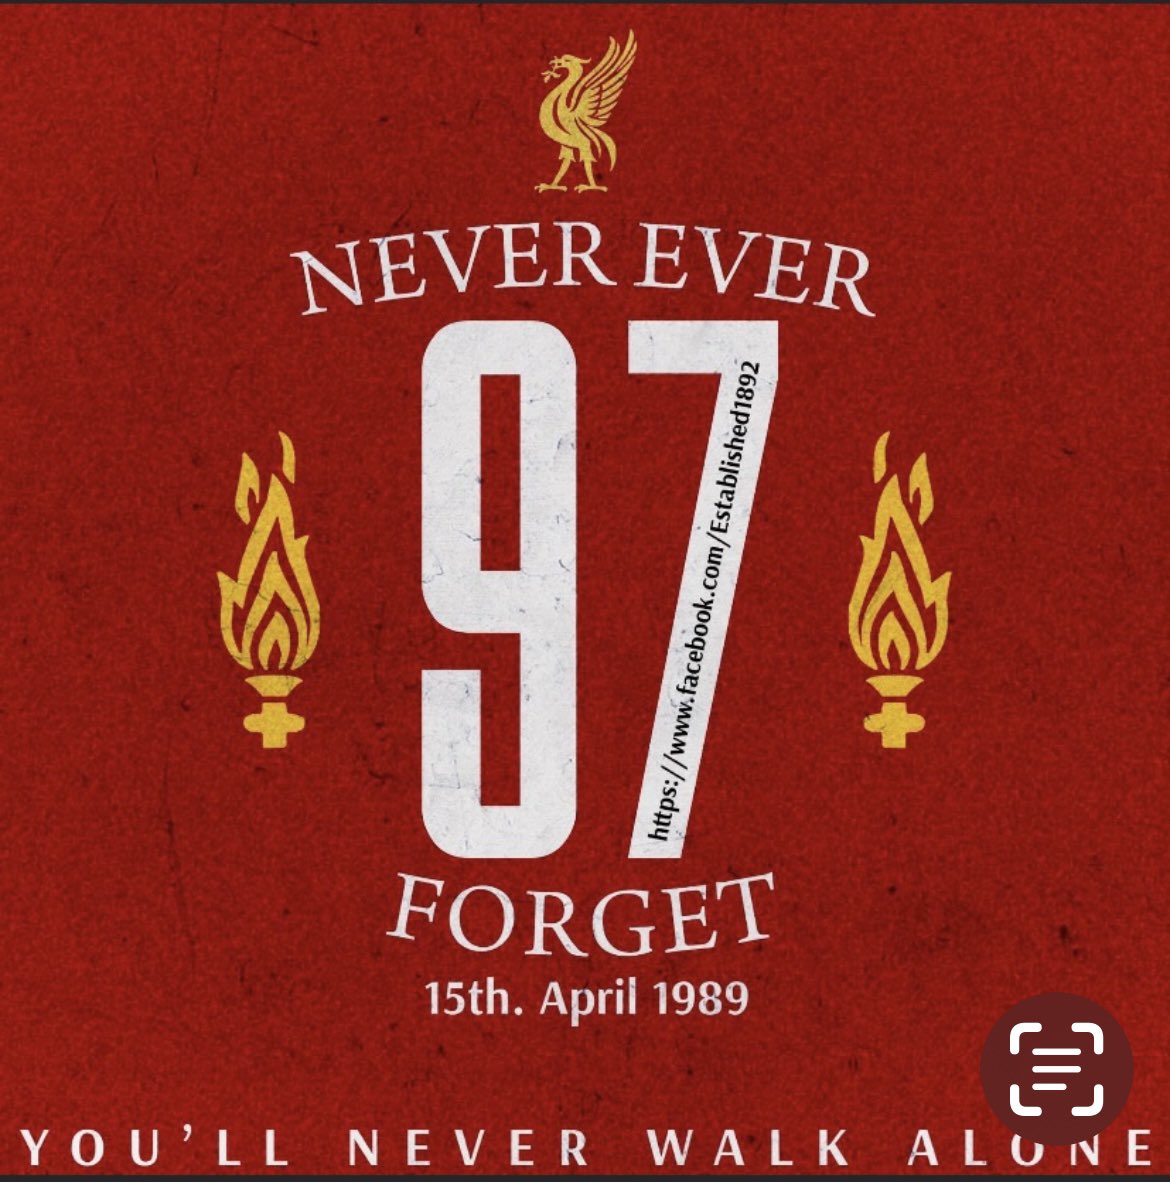 Wonderful silence for our 97 stars shining brightly especially today👏👏👏 YNWA❤️